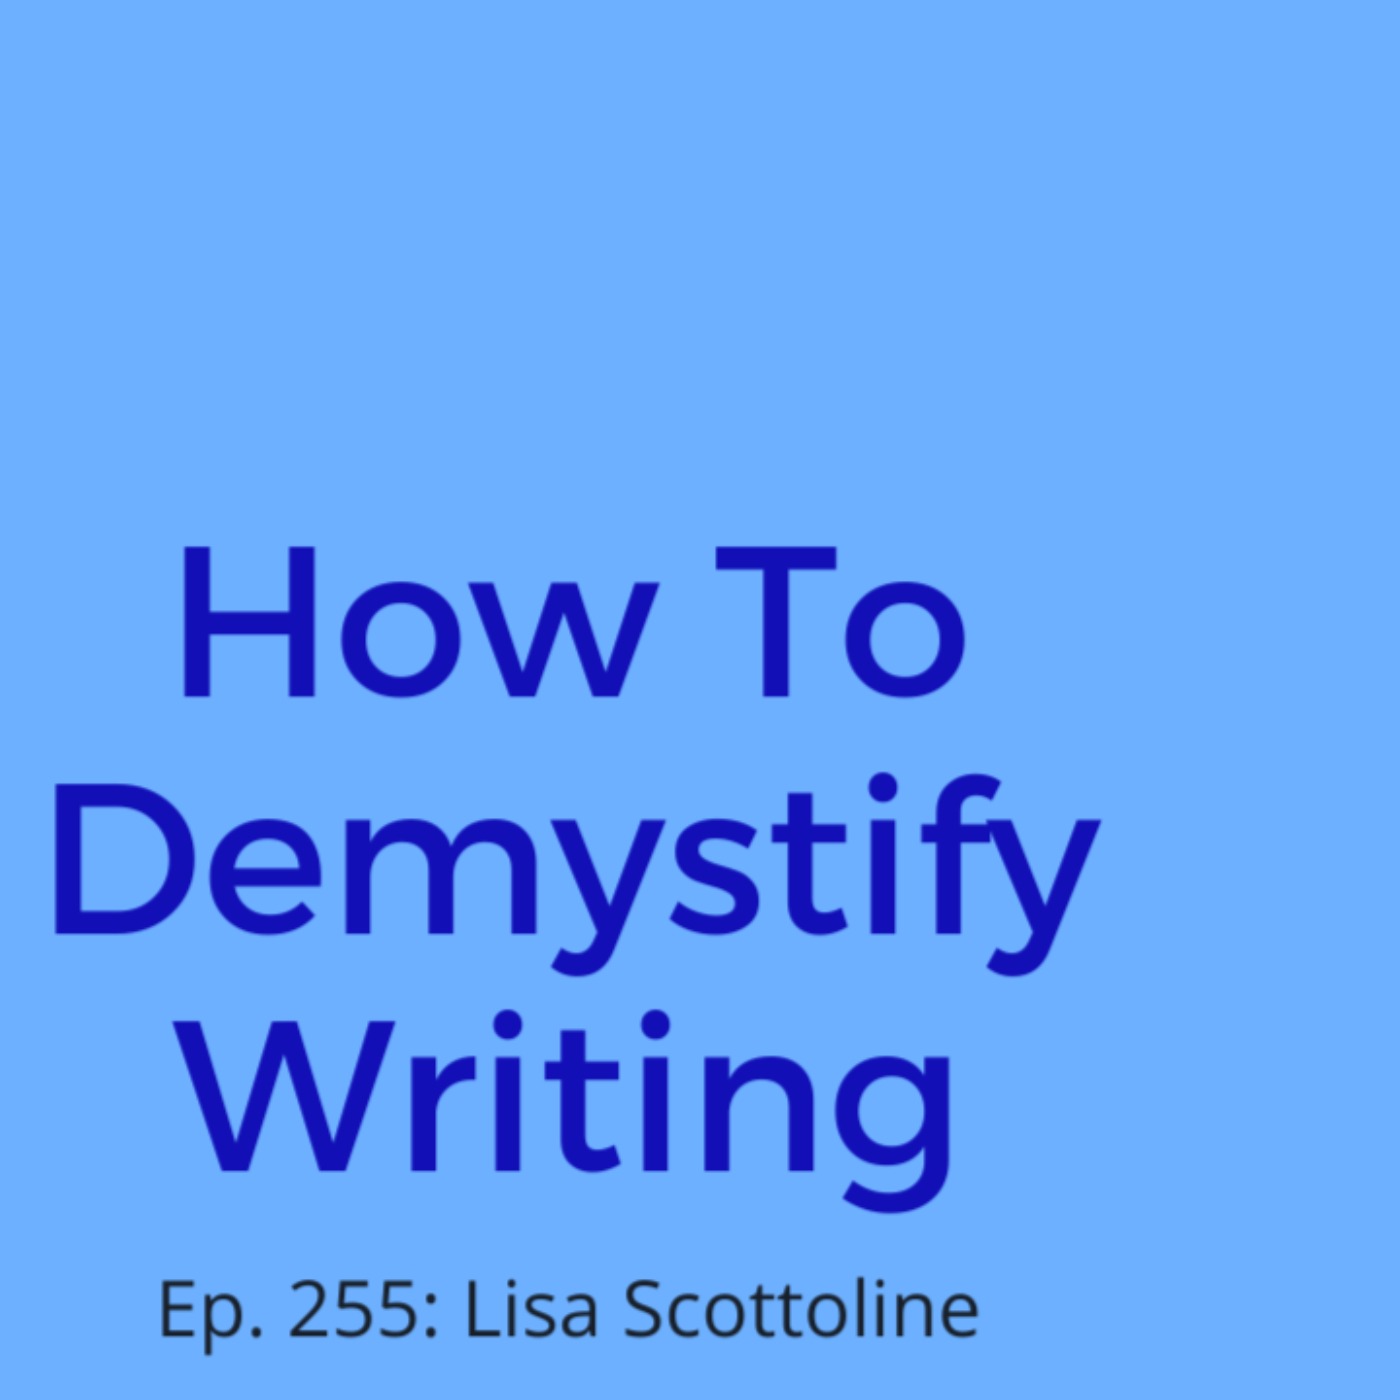 Ep. 255: Lisa Scottoline on How To Demystify Writing